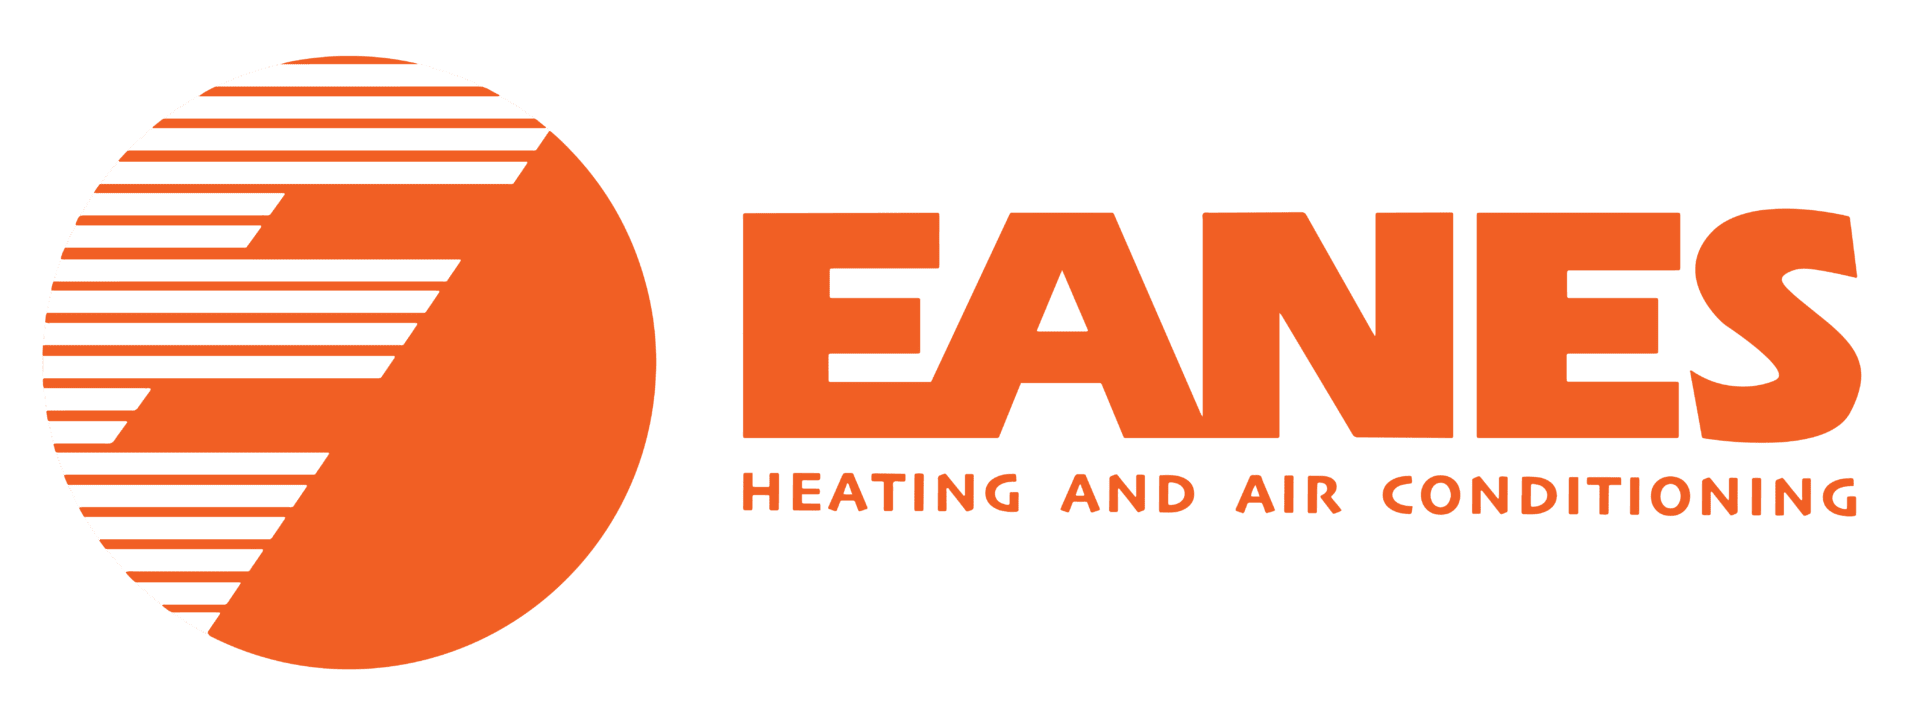 SAME DAY COMFORT CONSULTANT CONSULTATION AND ESTIMATE | Eanes Heating & Air